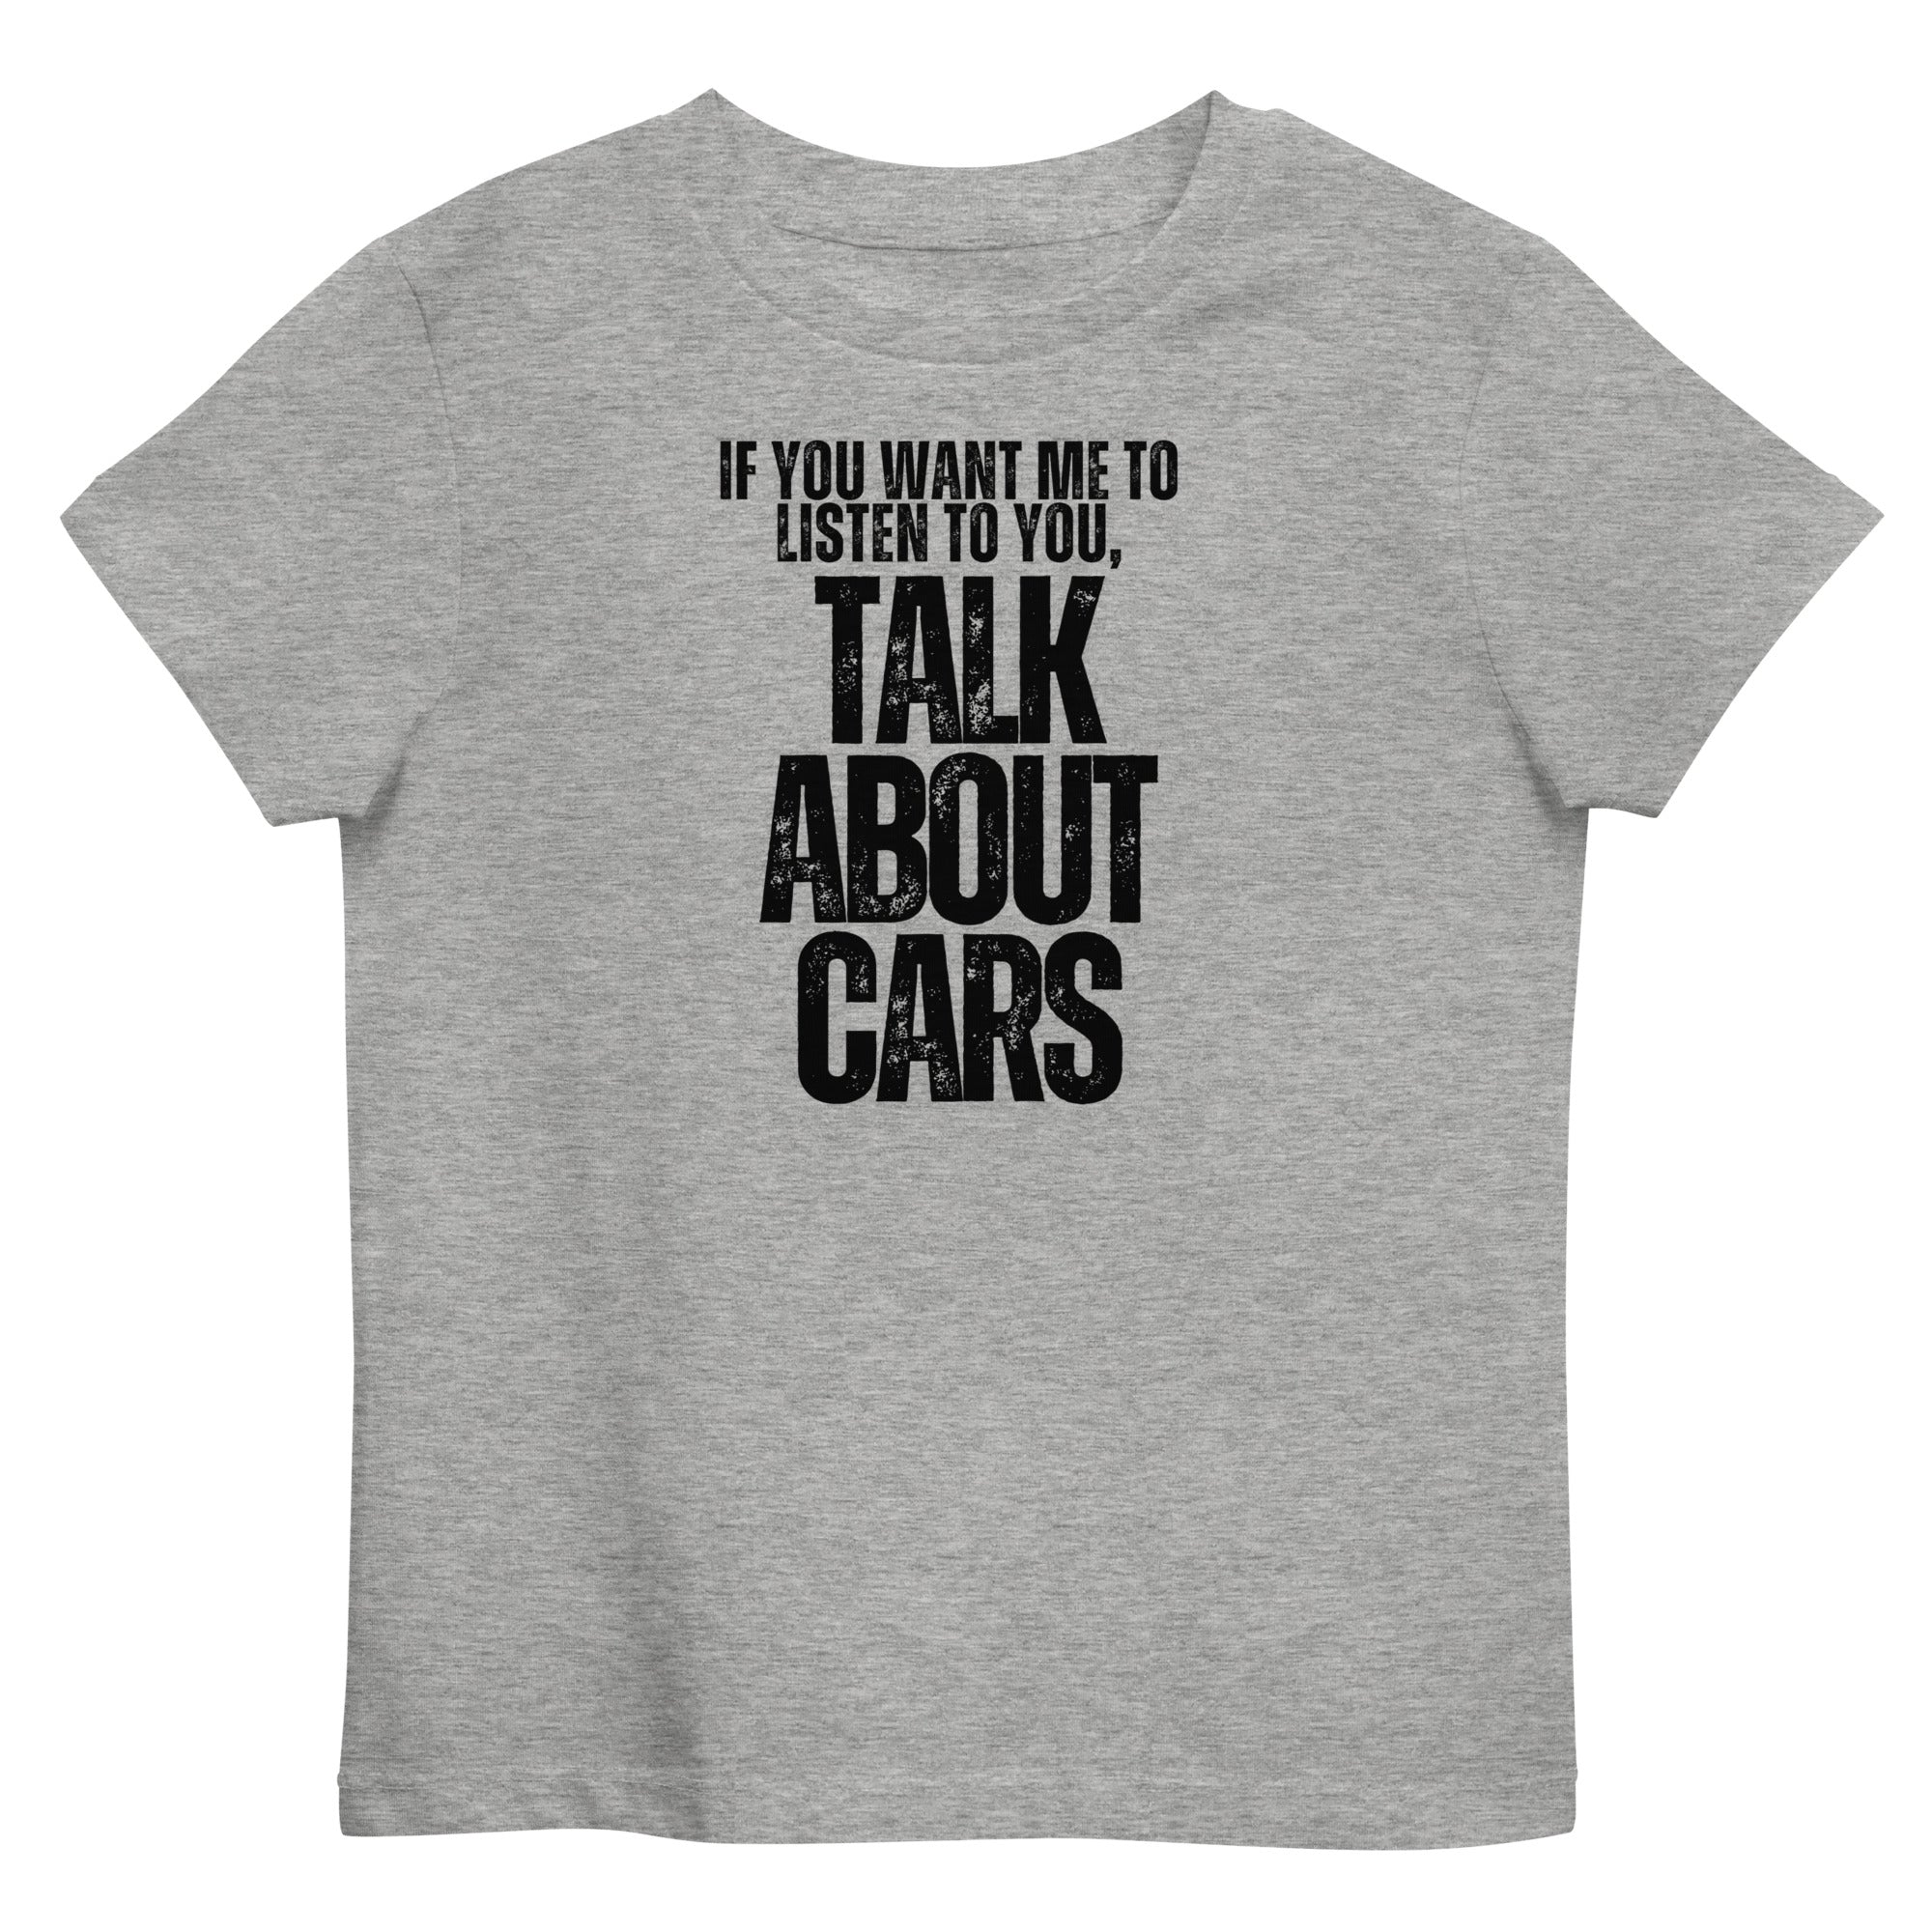 If You Want Me To Listen To You Talk About Cars - Kids